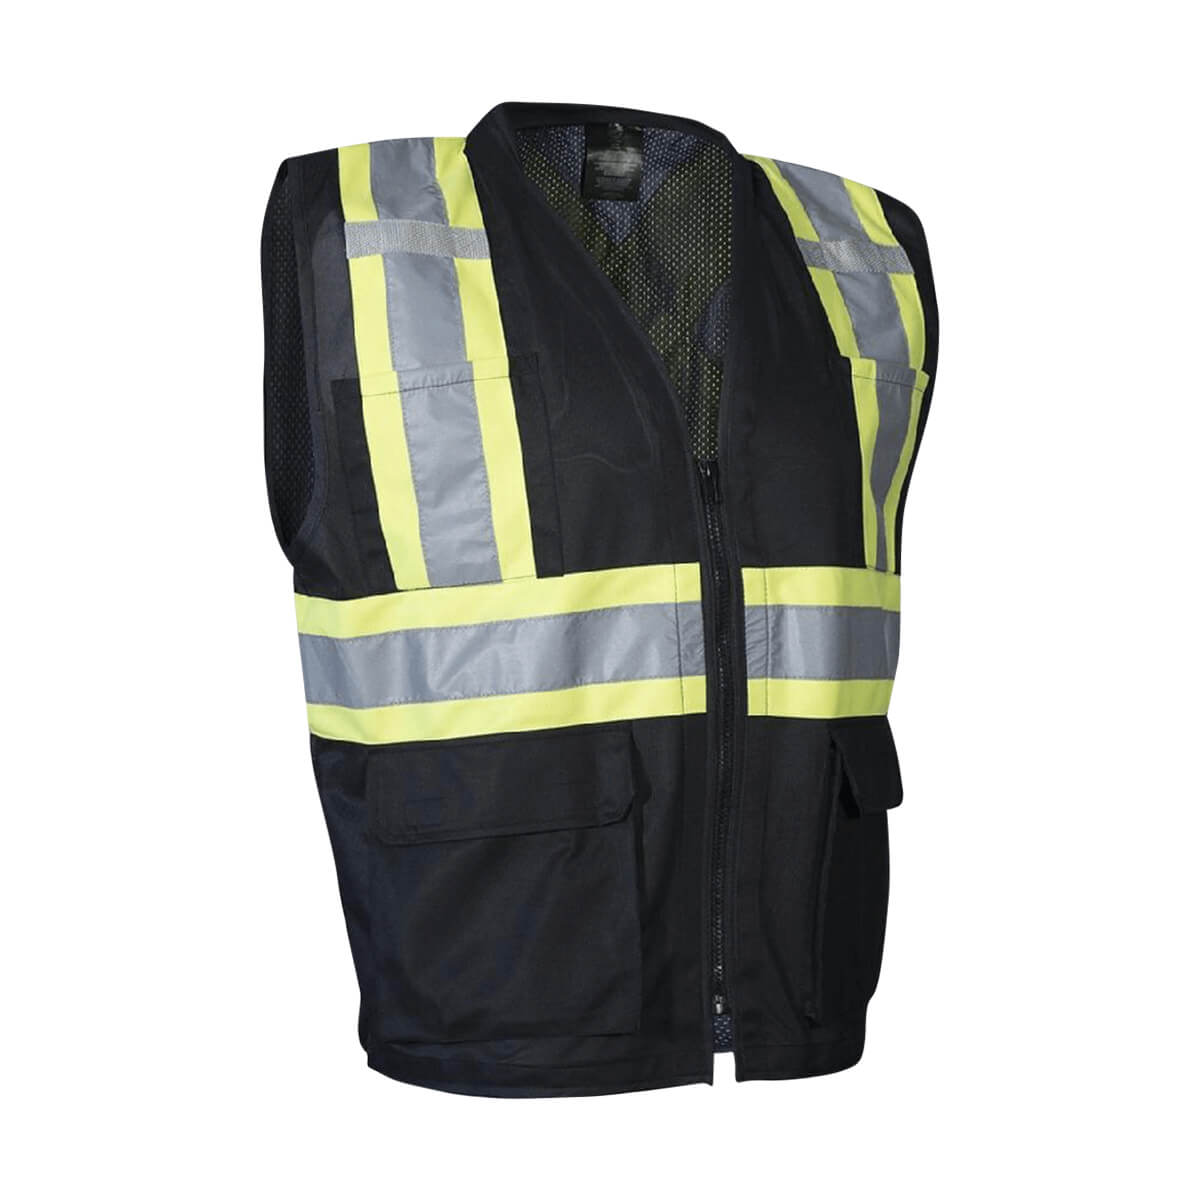 Forcefield Hi Vis Safety Vest with Front Zipper